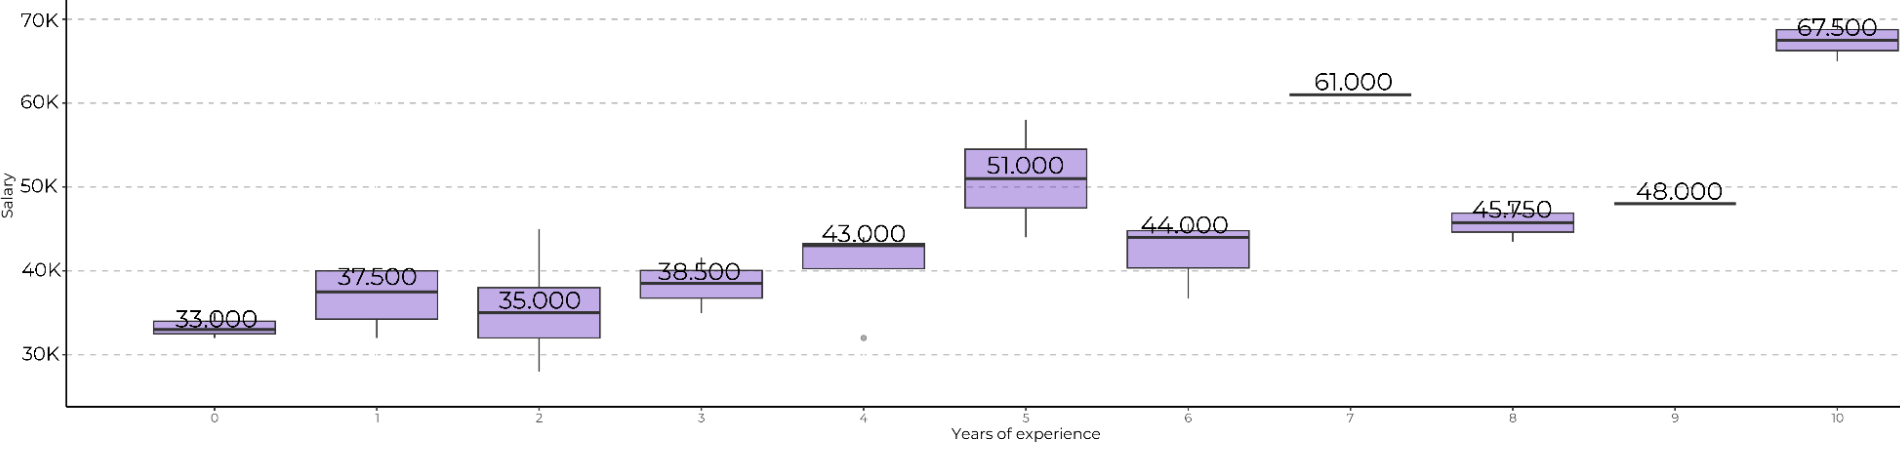 Graph showing salary ranges by years of experience for Service designers.